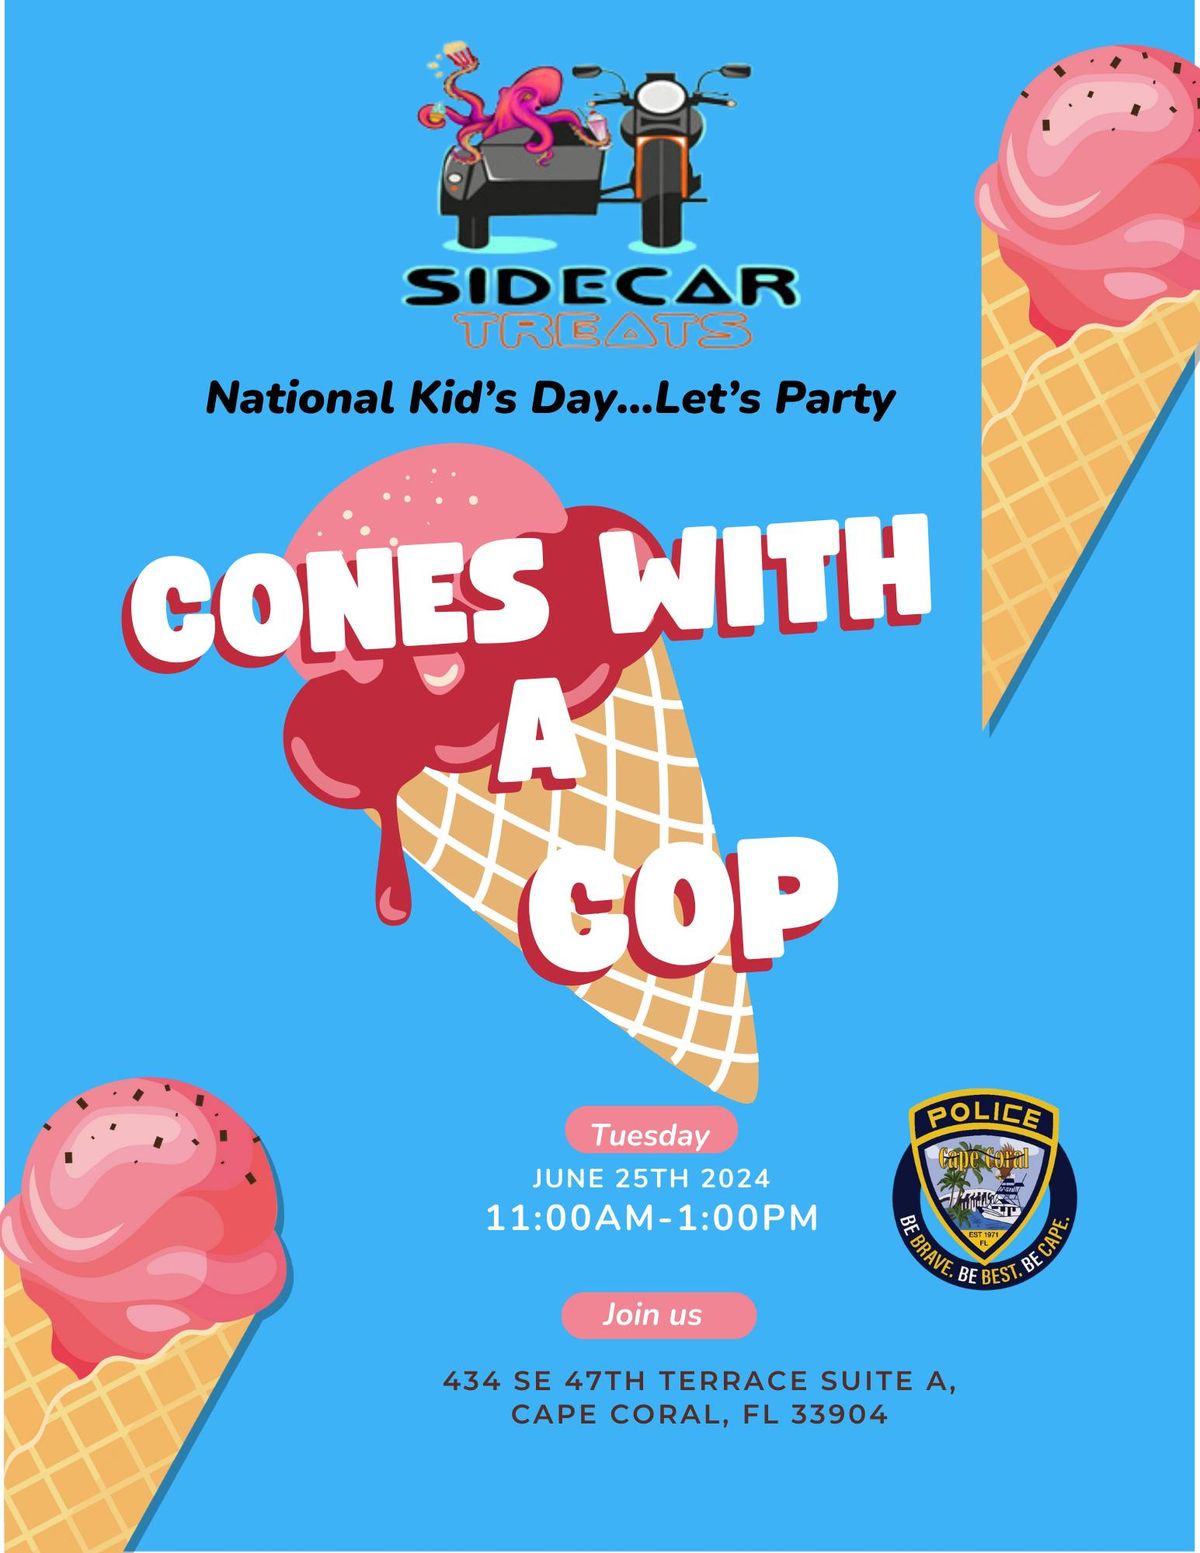 Cones with a Cop at Sidecar Treats!